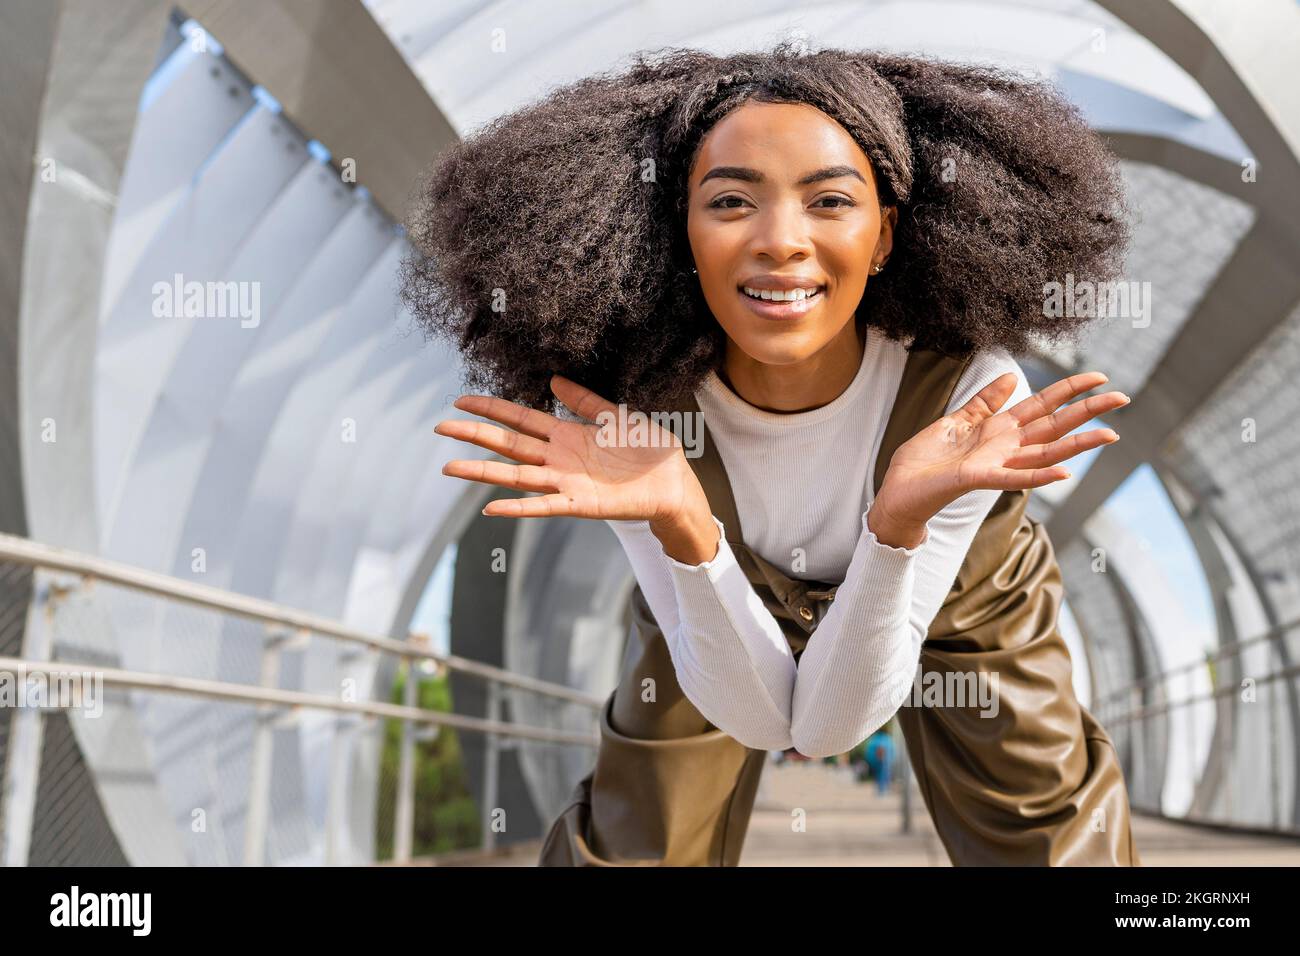 Smiling woman with Afro hair bending on bridge Stock Photo